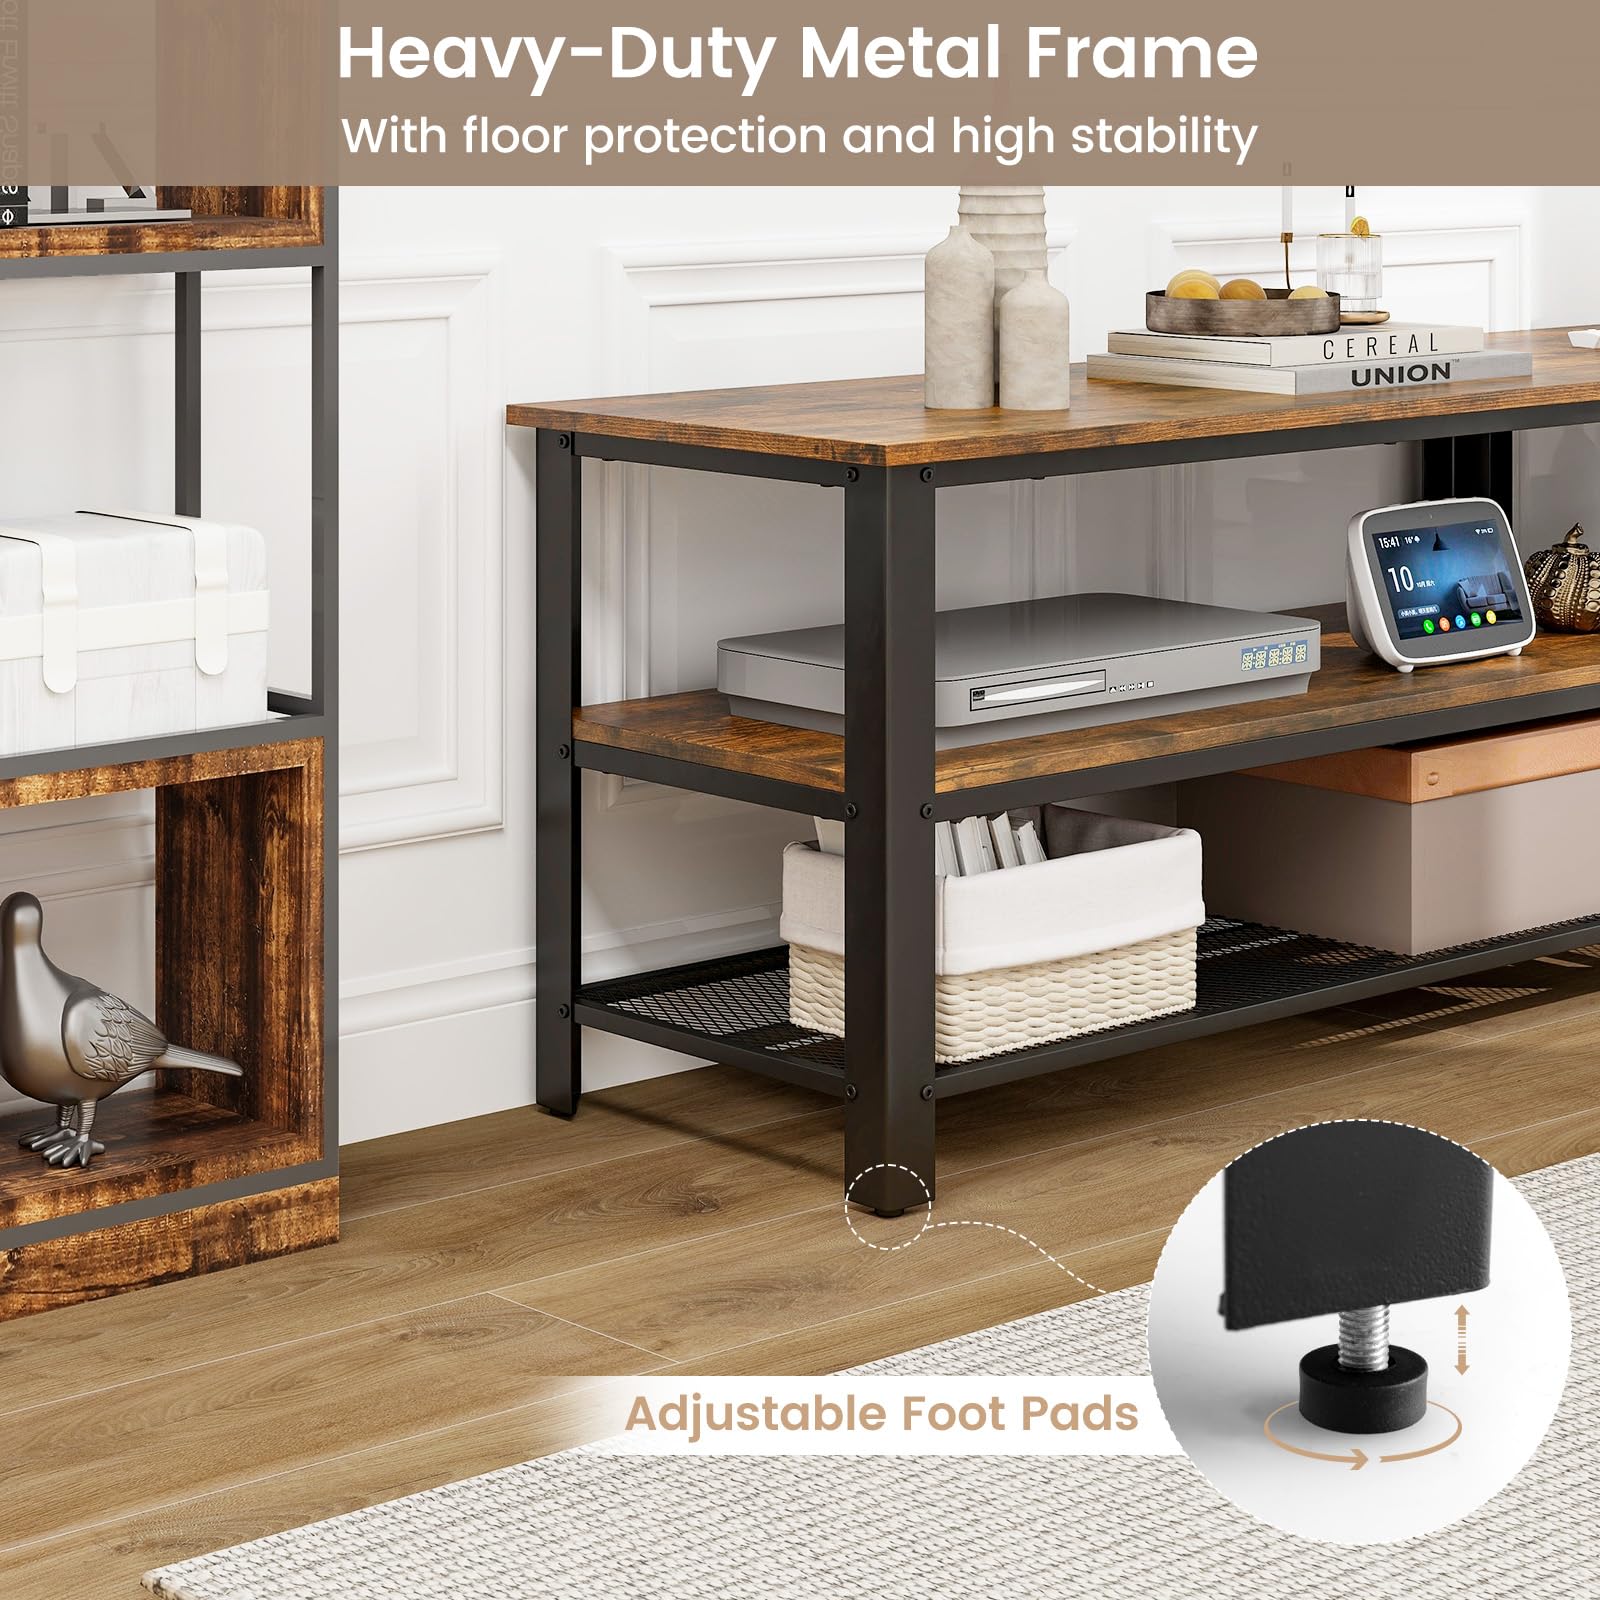 Giantex TV Stand for Bedroom and Living Room - 3-Tier Industrial Entertainment Center with Open Storage Shelves